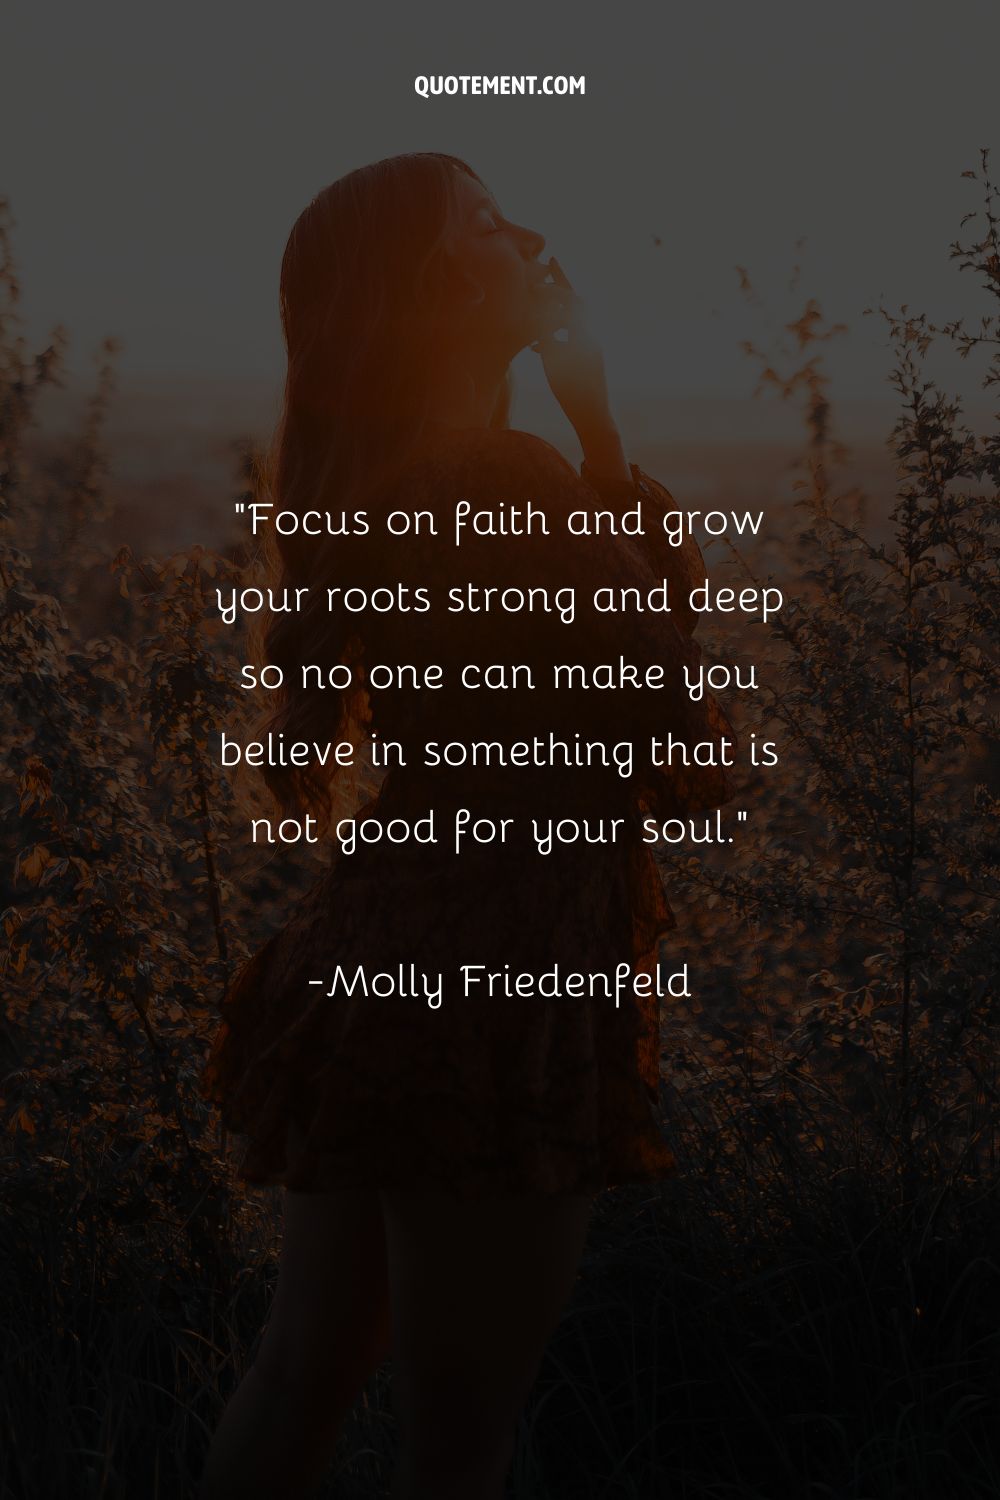 Focus on faith and grow your roots strong and deep so no one can make you believe in something that is not good for your soul